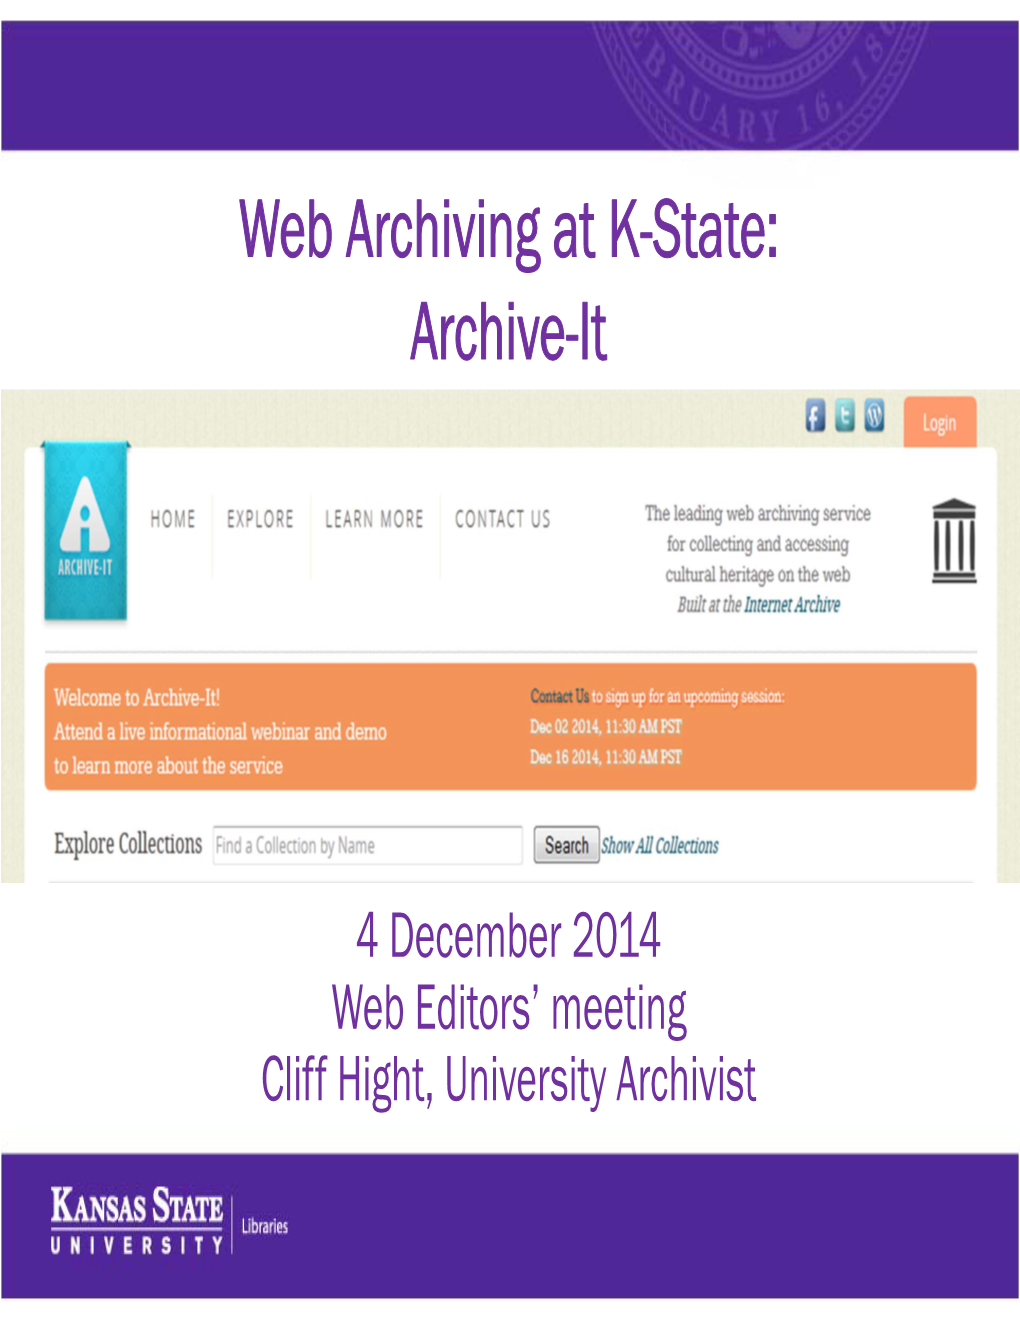 Web Archiving at K-State: Archive-It